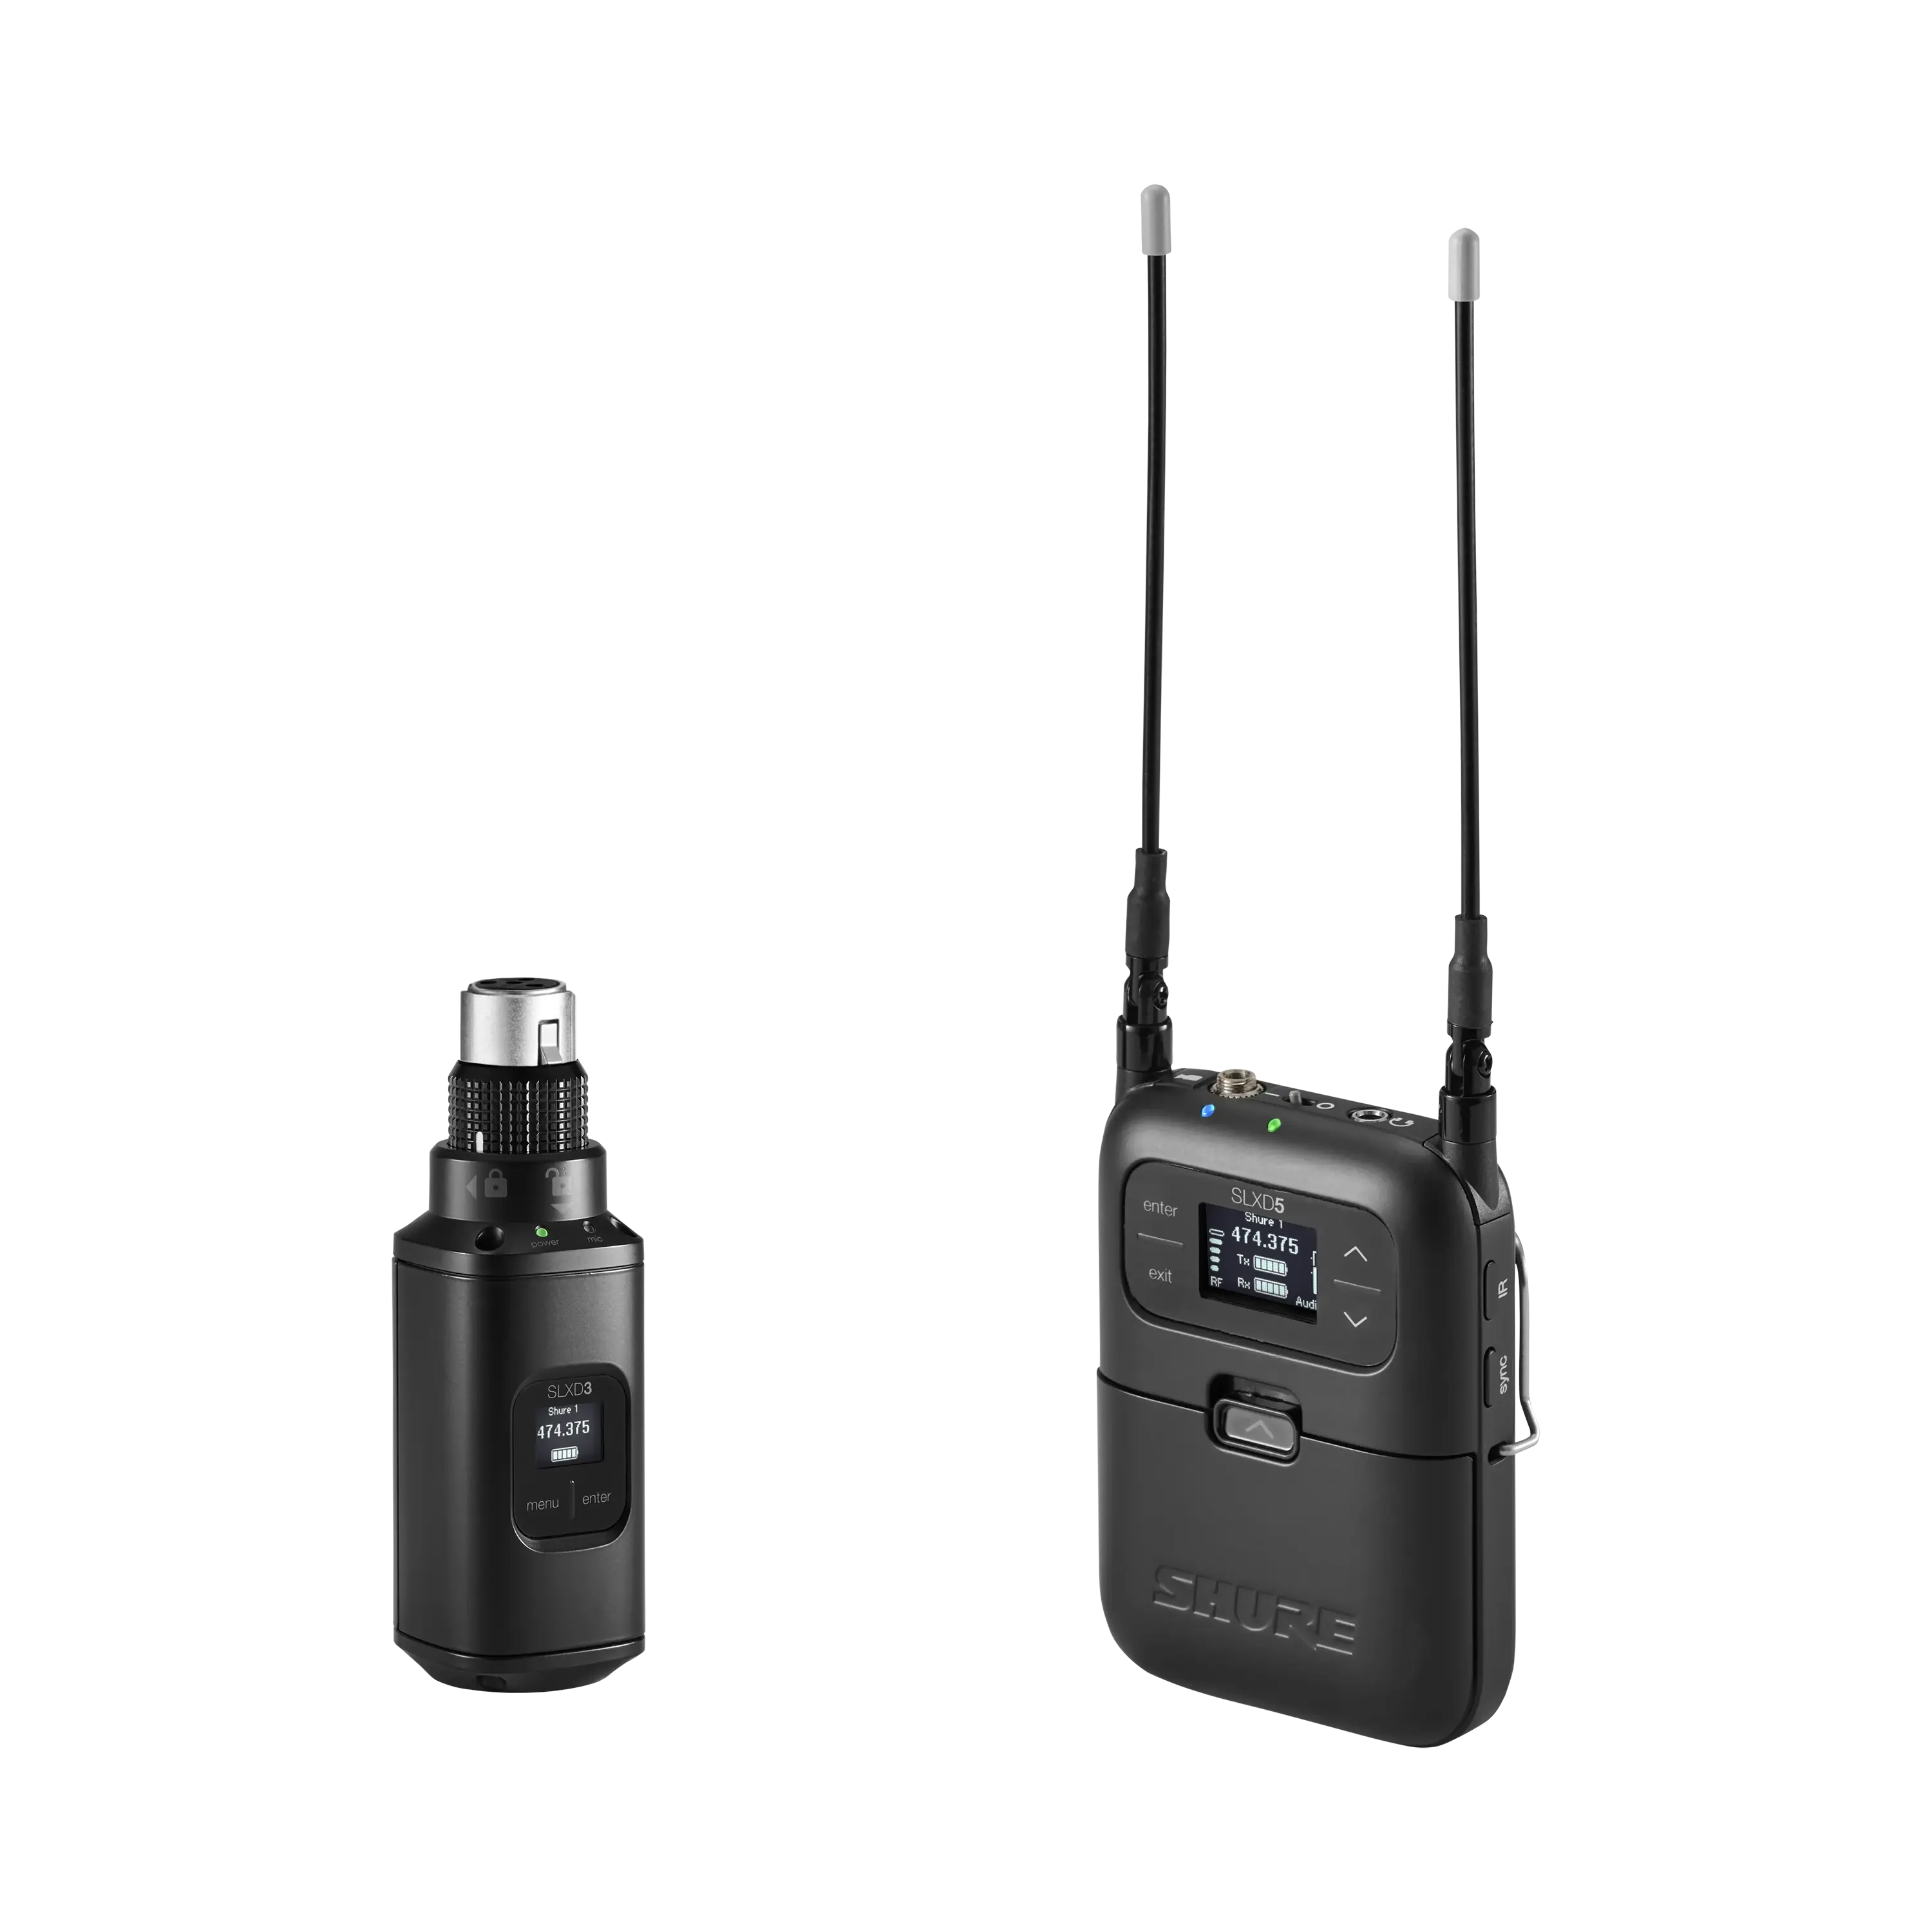 SLXD35-G58 Portable Wireless System With Plug-On Transmitter